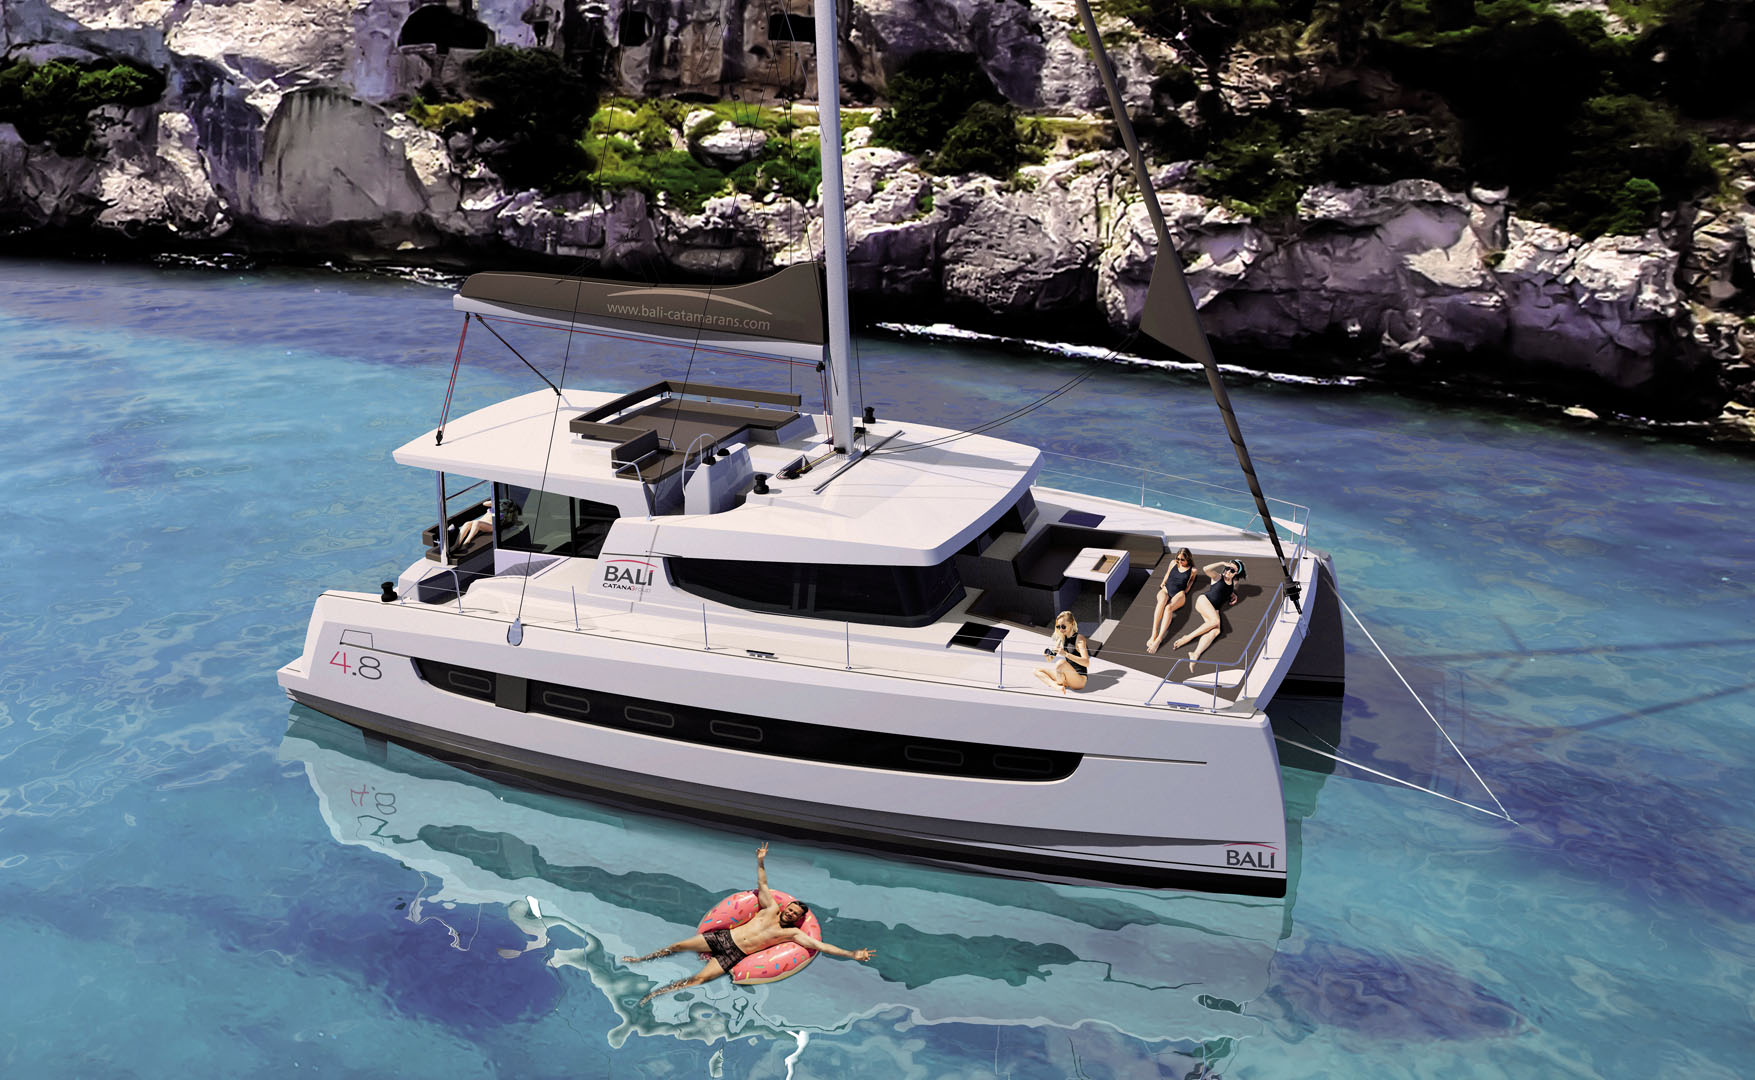 Catamaran BALI 4.8 - pictures, plans and features